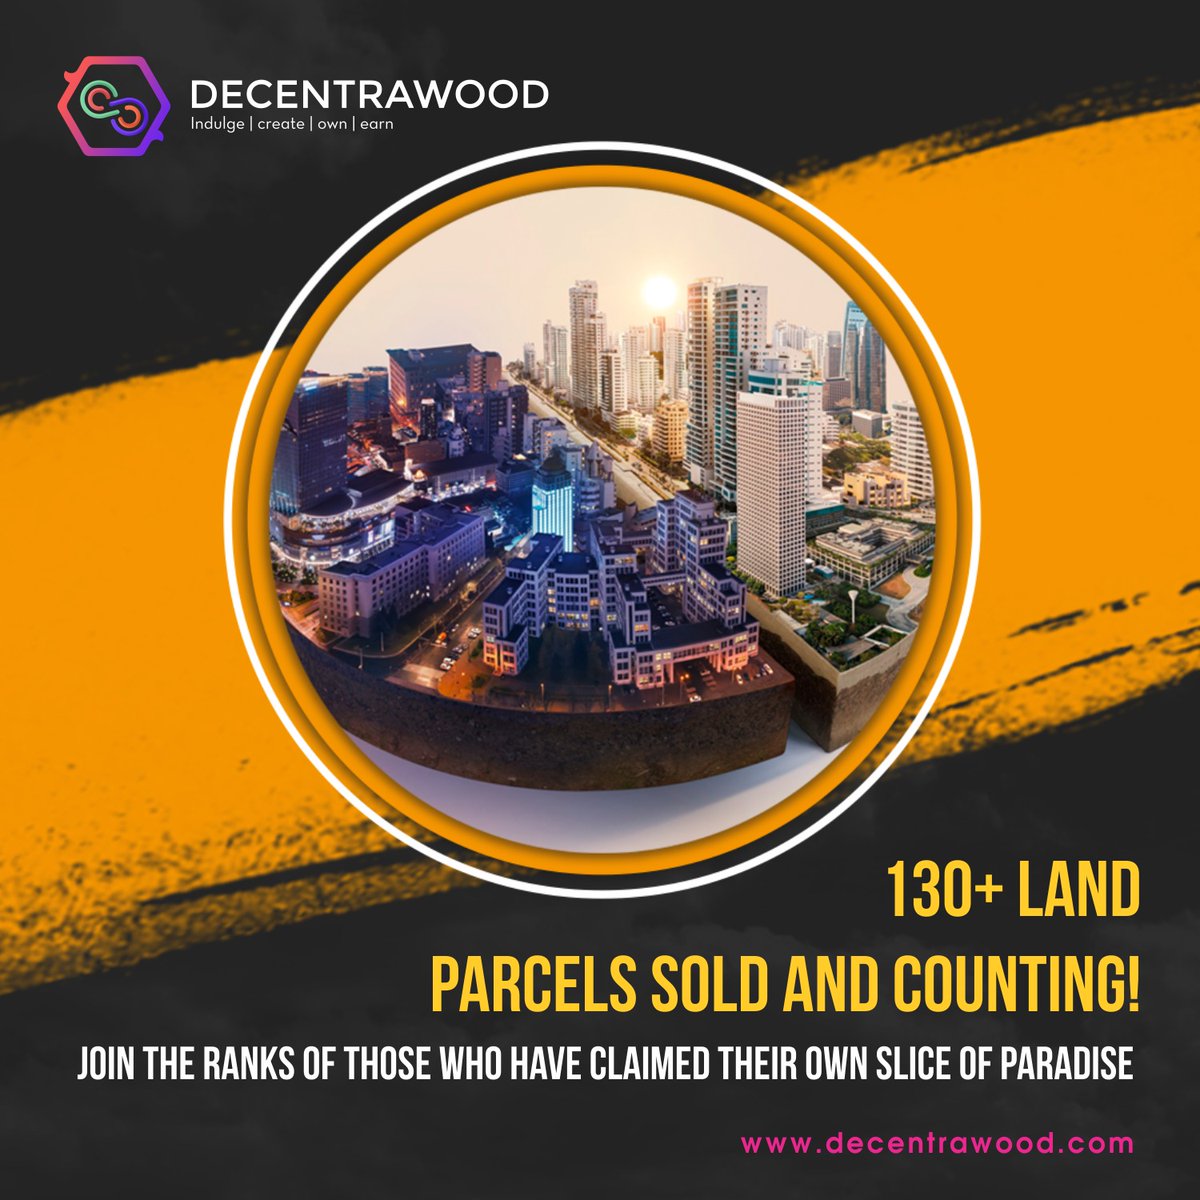 🌍 Dream World Awaits! 🏝️✨

🔥 130+ Land Parcels SOLD! Claim yours now and create your paradise.

💫 Build, explore, and make your dreams a reality in this enchanting land of possibilities.

#Decentrawood #MetaLandParcel #VirtualLandParcel #LandParcel #DreamWorld #LandForSale